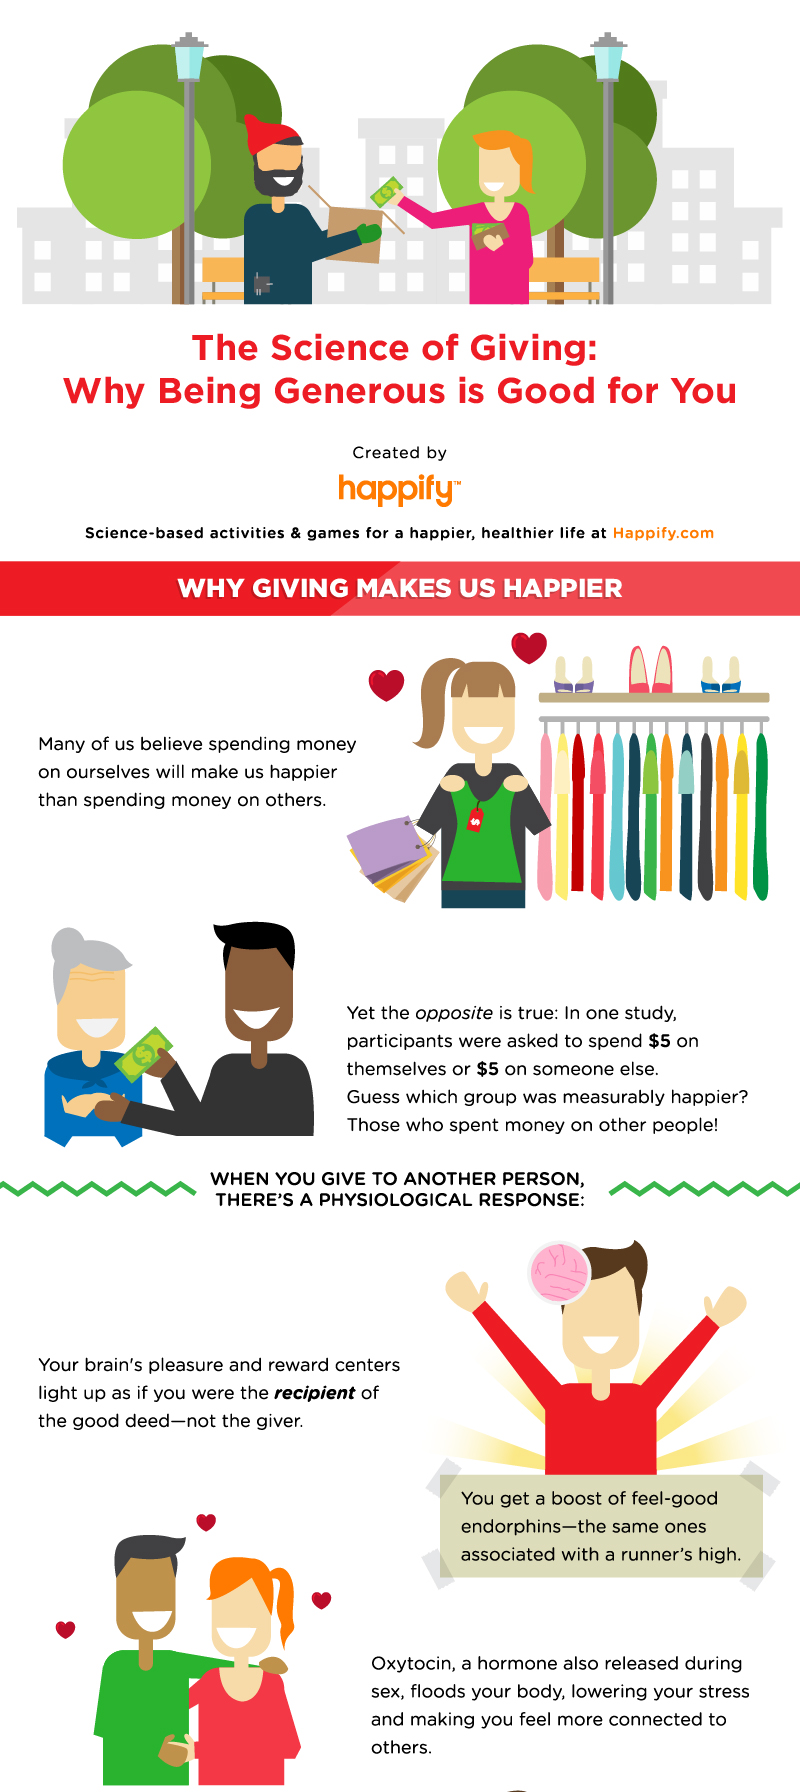 Giving-Happify-infographic v2